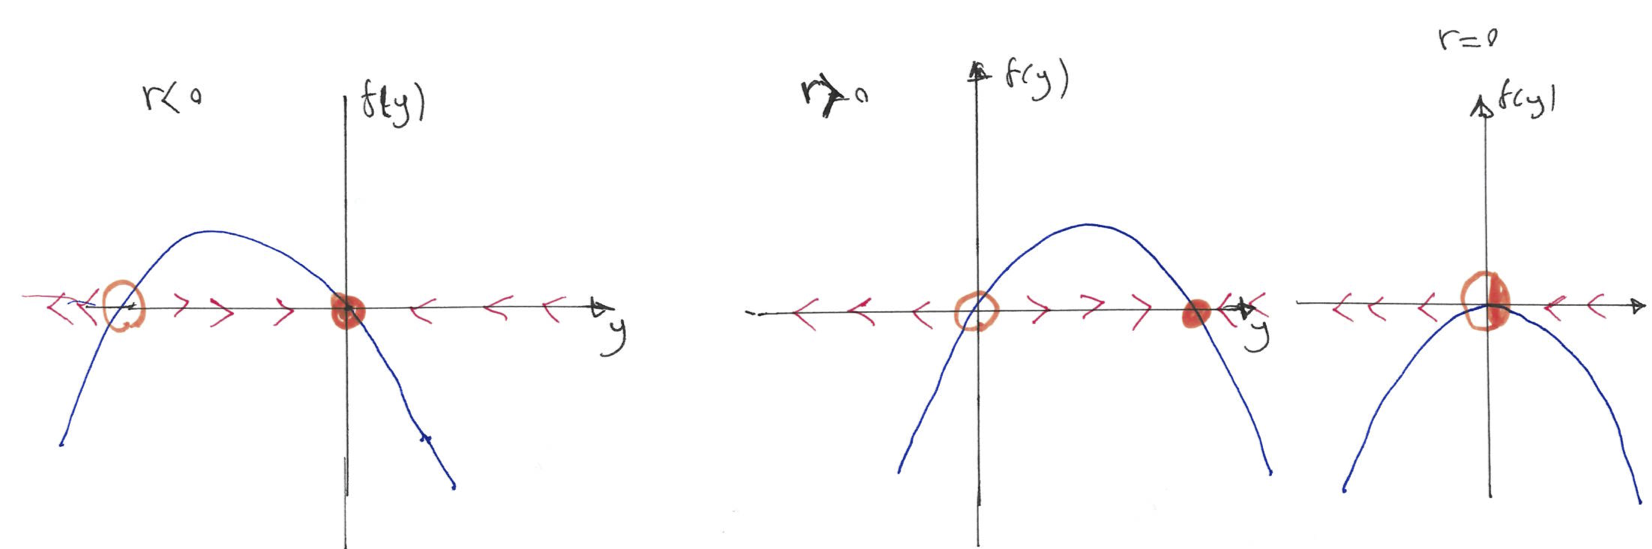 The plot of $f(y)$ vs $y$ for different values of $r$, illustrates the vector field and the stability of the fixed point for transcritical bifurcation.